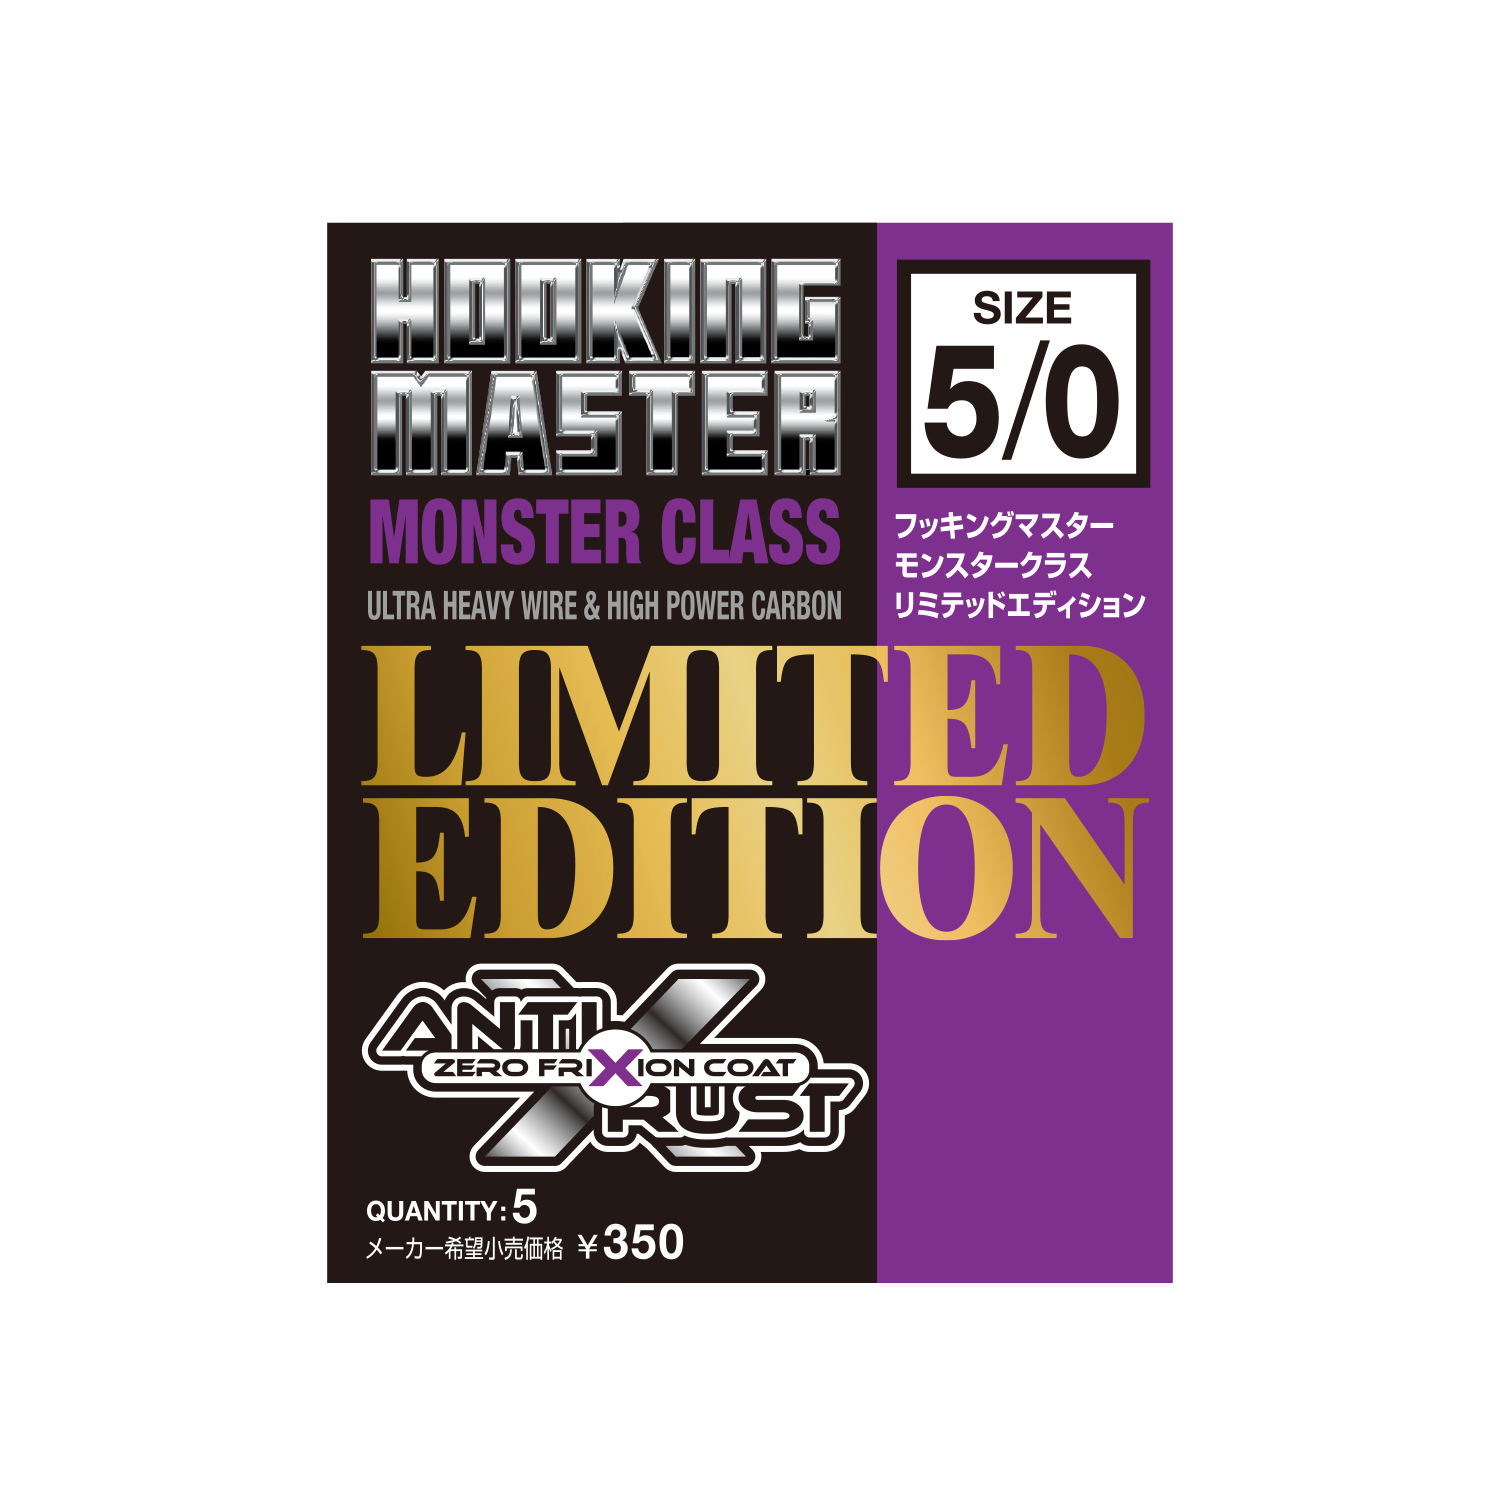 Nogales Hooking Master Limited Edition Monster Class